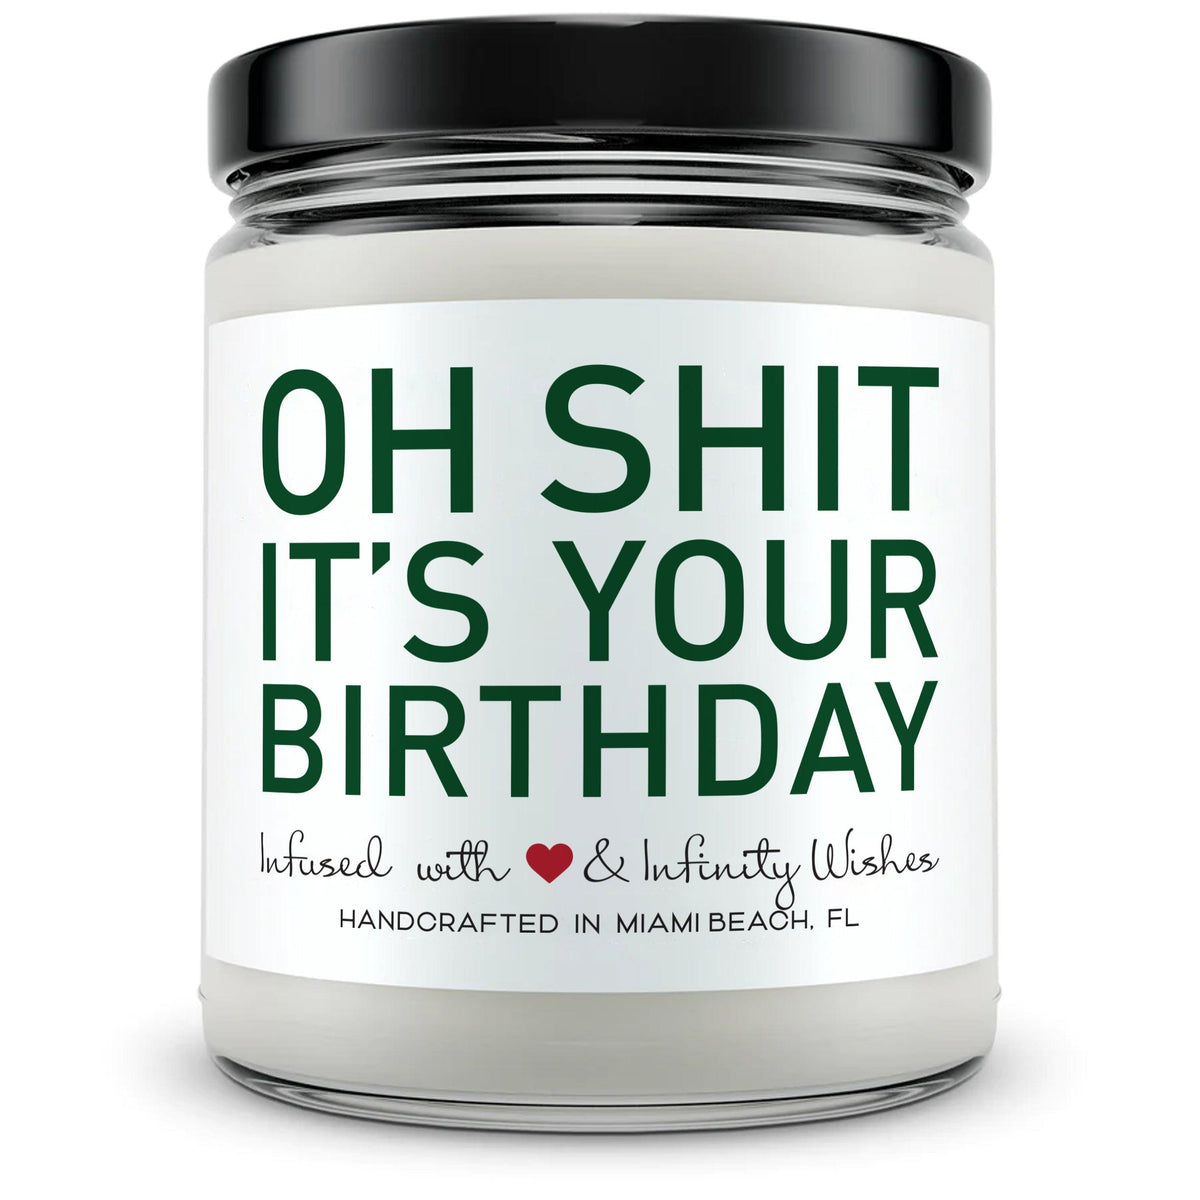 Oh Shit, It's your Birthday! - Mint Sugar Candle